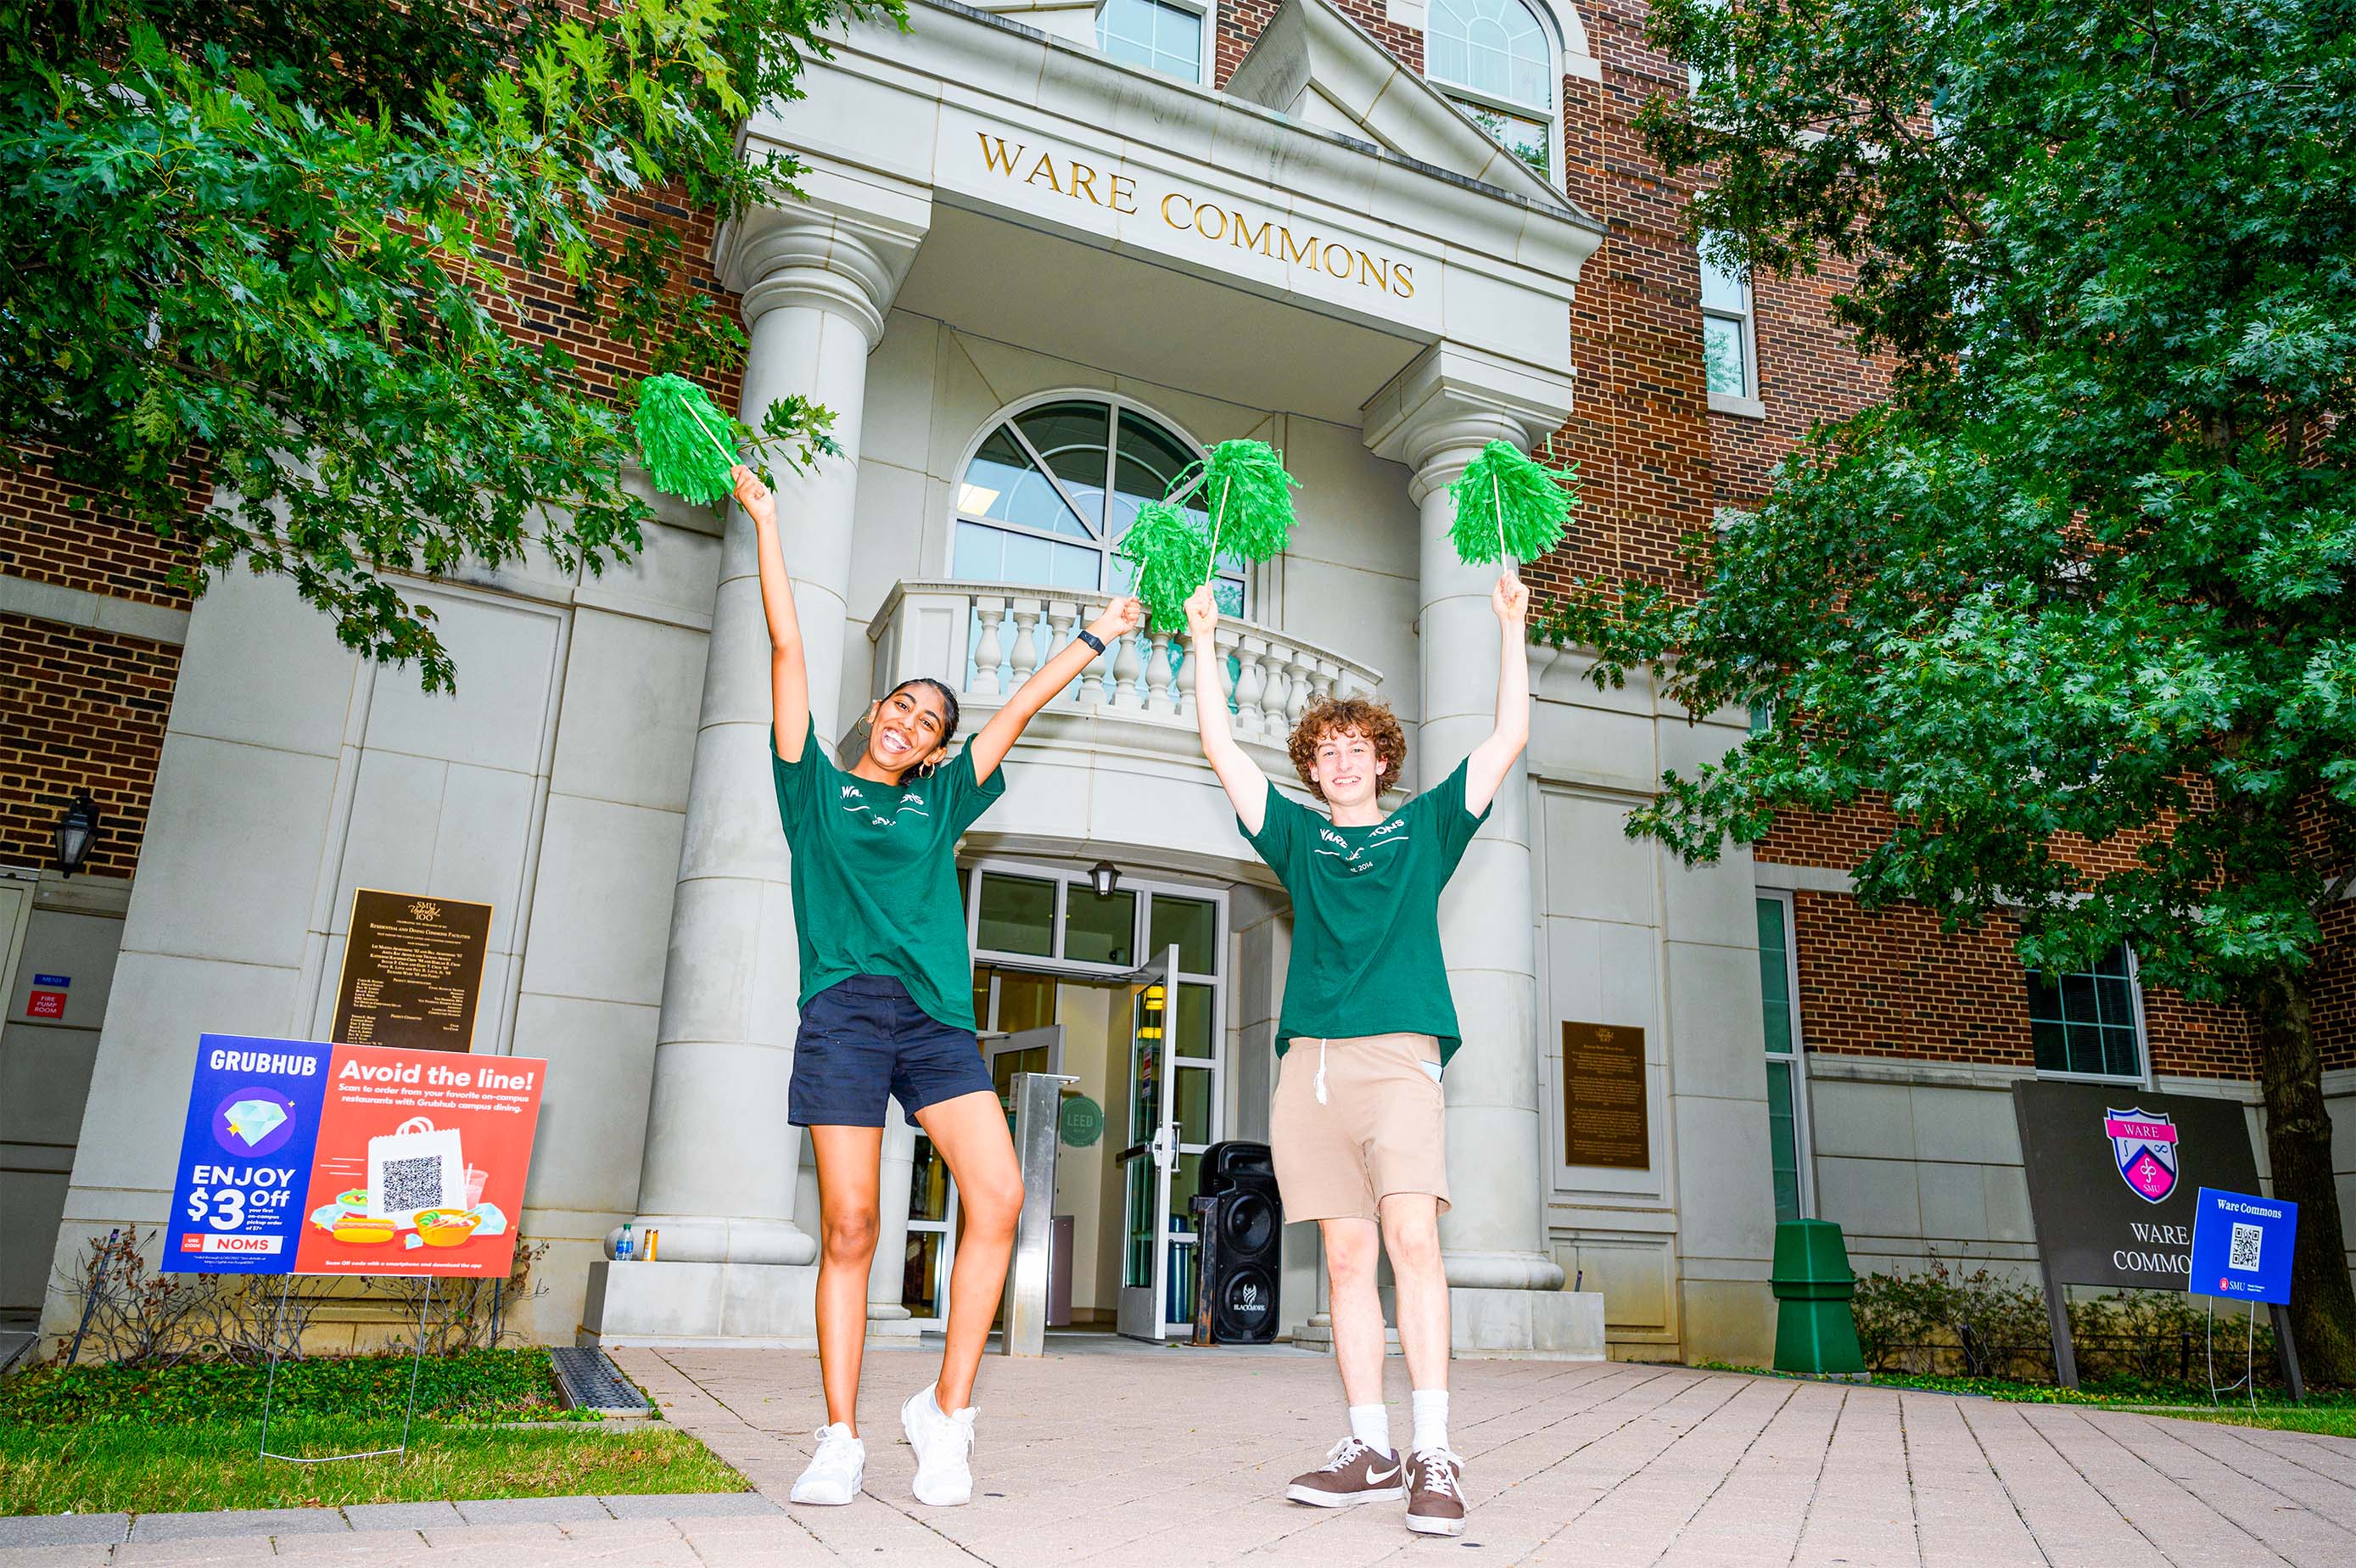 two students excited in front of Ware Commons with green pom poms and wearing green Ware t-shirts